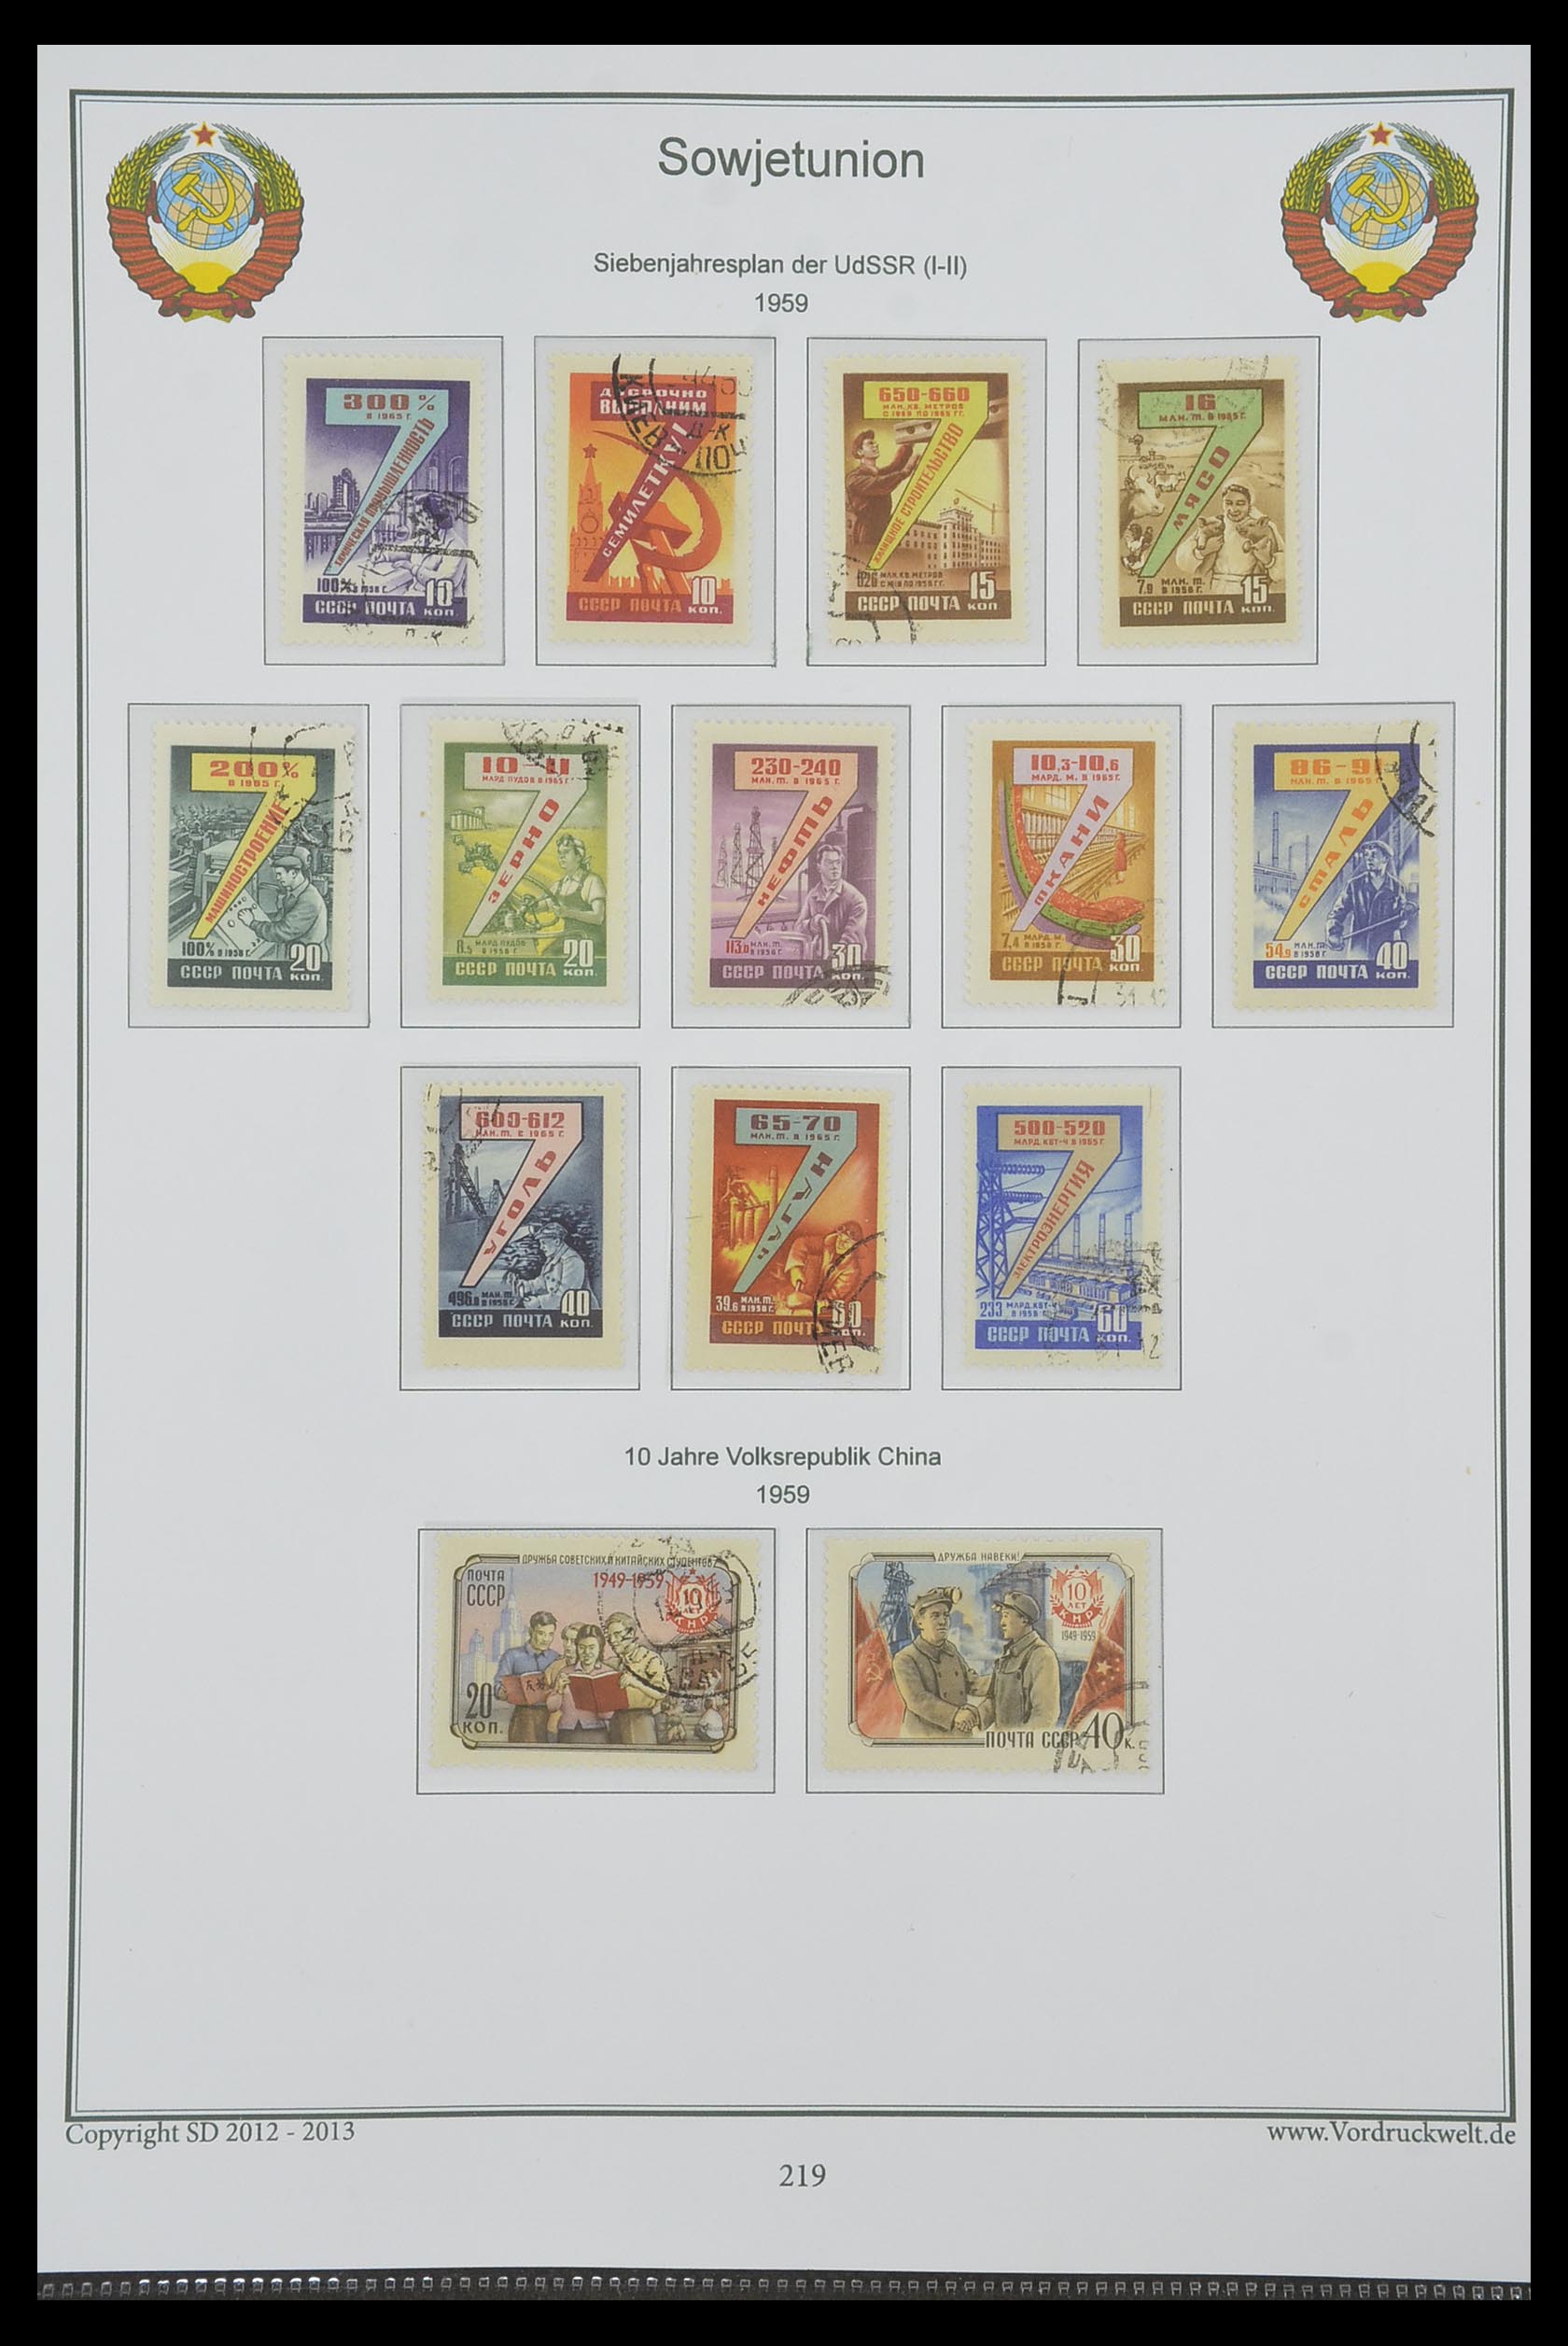 33974 223 - Stamp collection 33974 Russia 1858-1998.